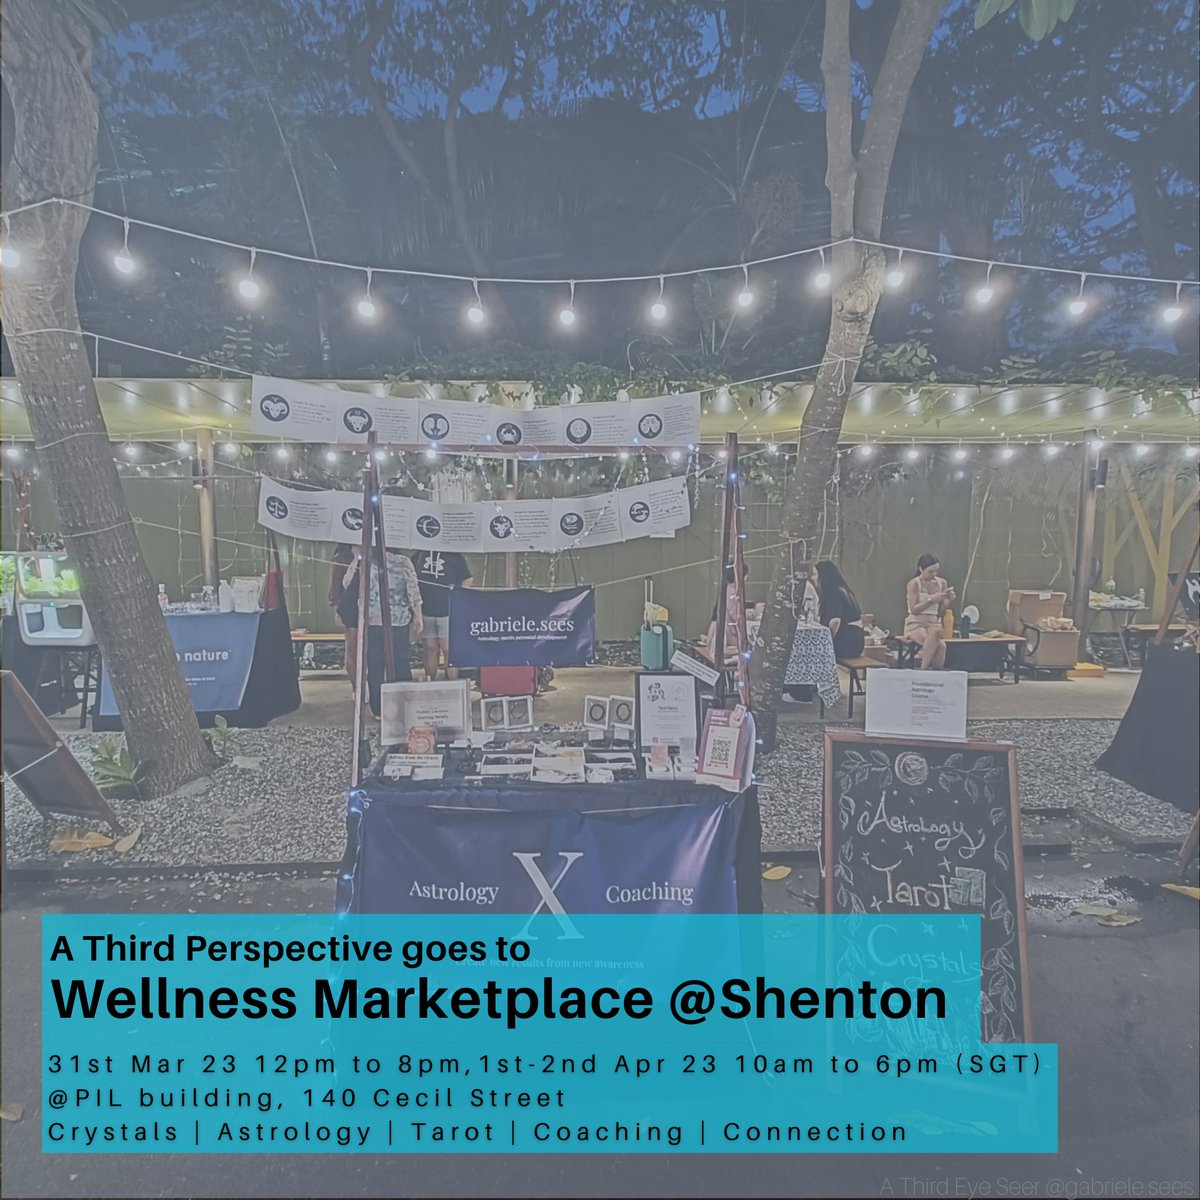 I'm proud to announce that I'd be part of the Wellness Marketplace happening at Shenton organised by Athma Soulutions two Fridays from now!

As usual, I'd be doing taster #natalchart readings and #tarot using my coach approach, so be sure to come down with your birth details!